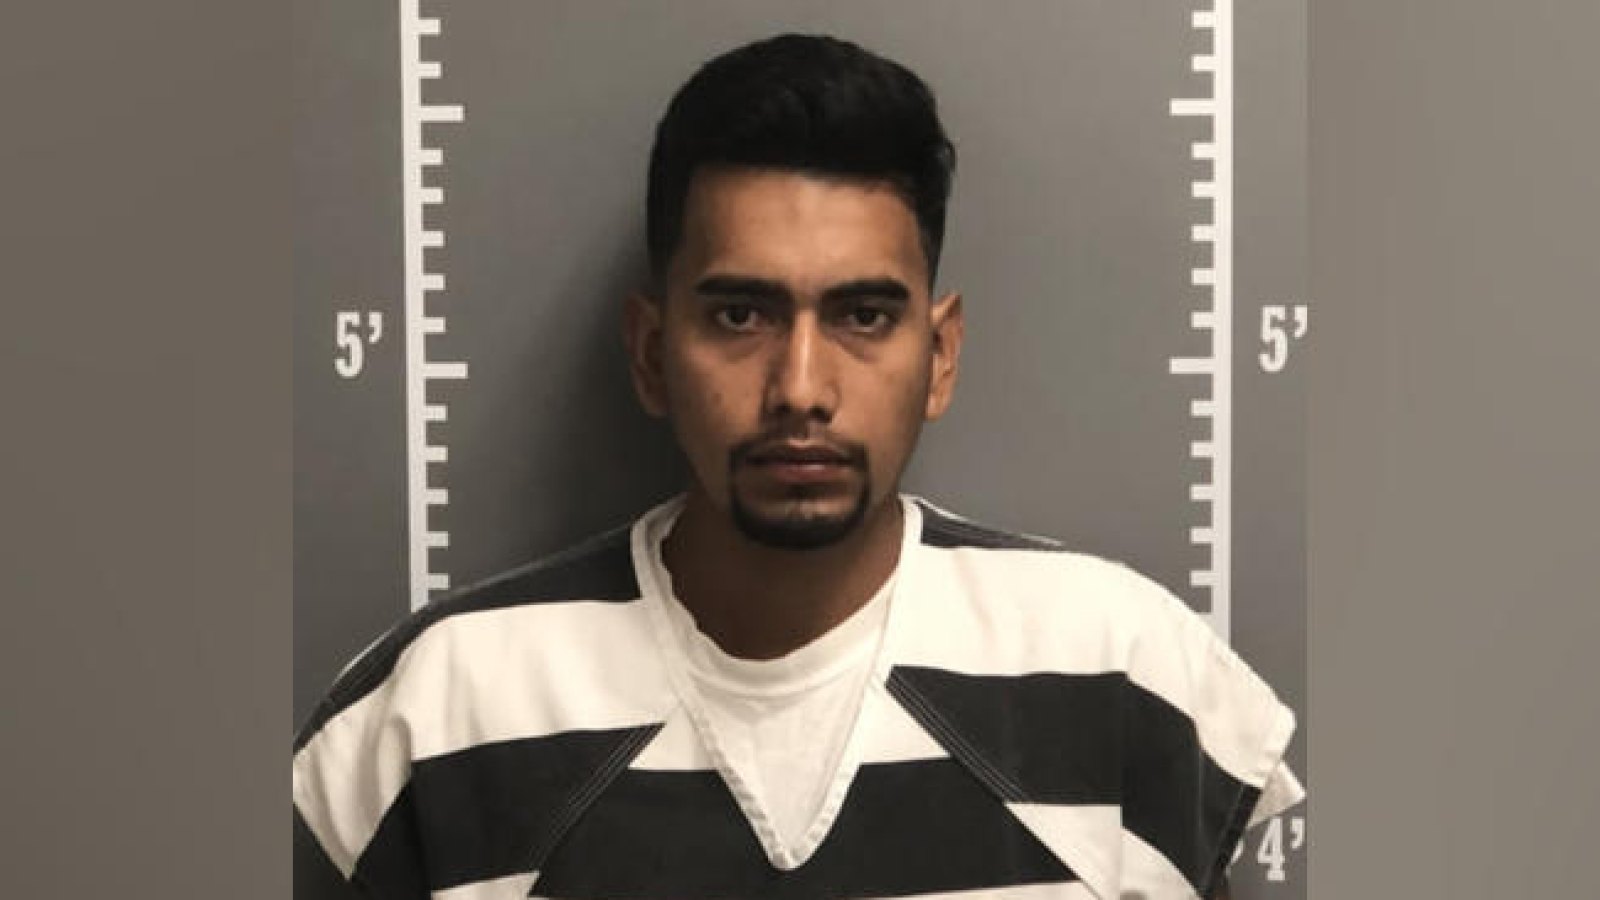 Suspect Arrested in the Death of Missing University of Iowa Student Mollie Tibbetts